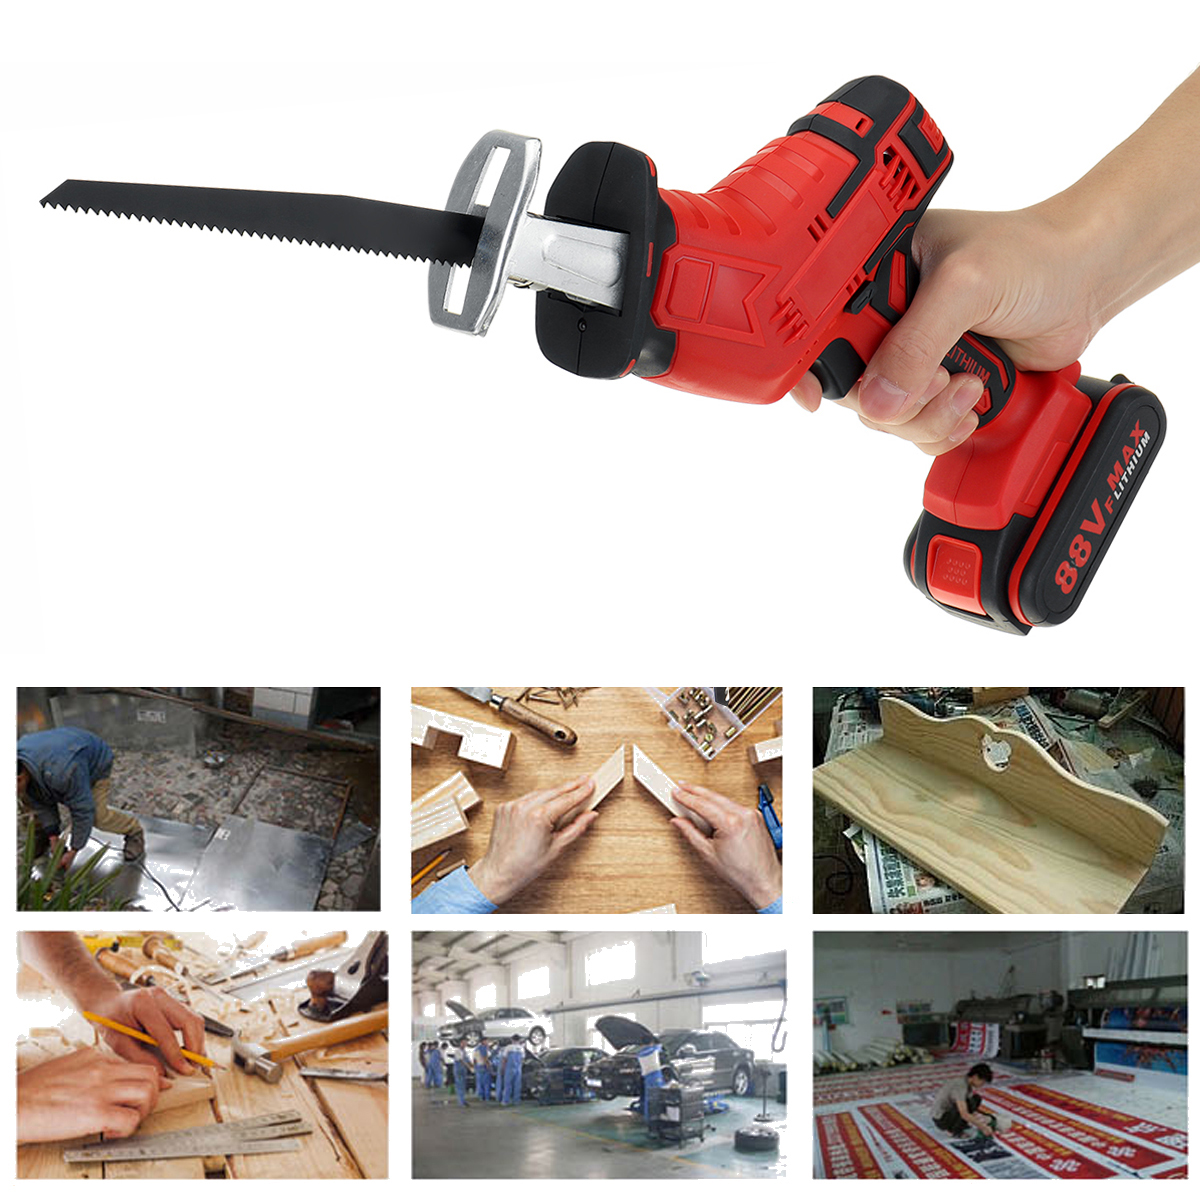 88VF-Electric-Reciprocating-Saw-Outdoor-Cordless-Portable-Saw-Woodworking-Cutter-1733463-3